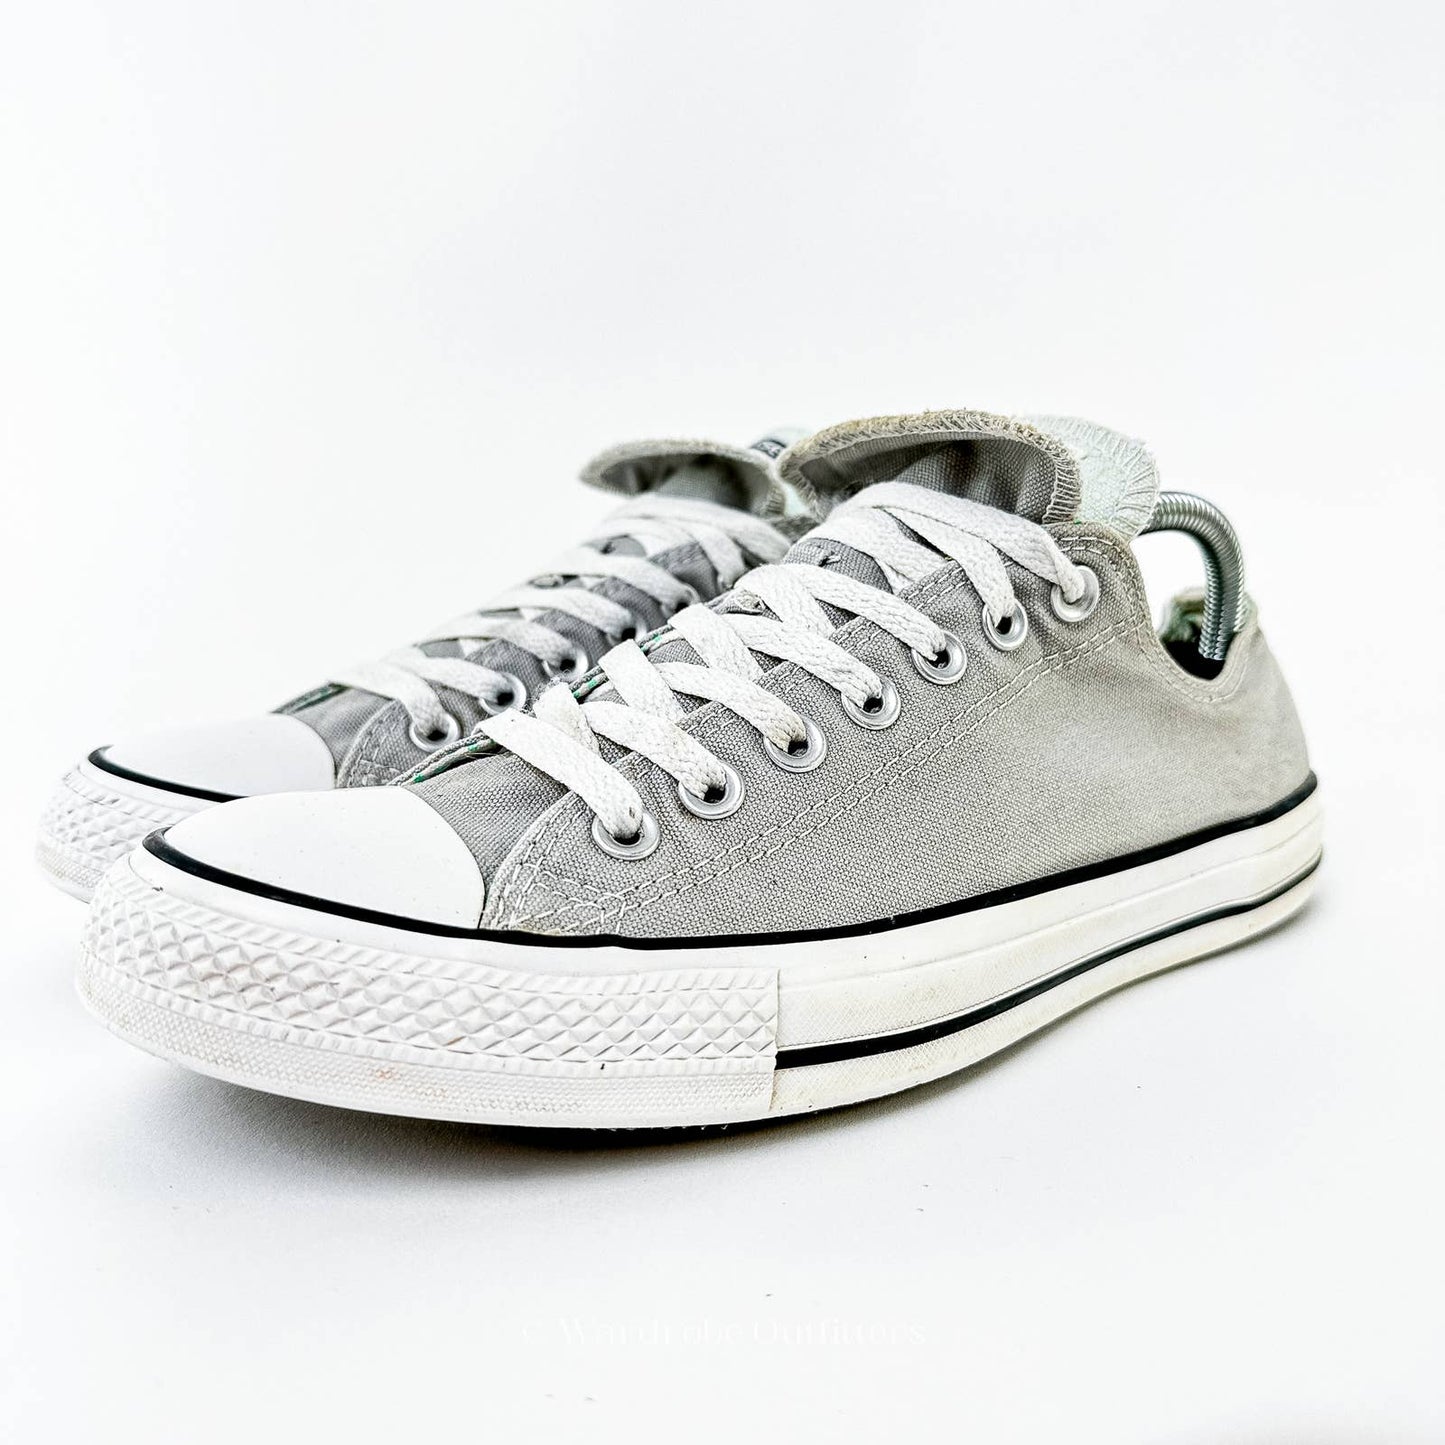 Mint Converse All Star Double Tongue Lo Top OxSneakers - 7